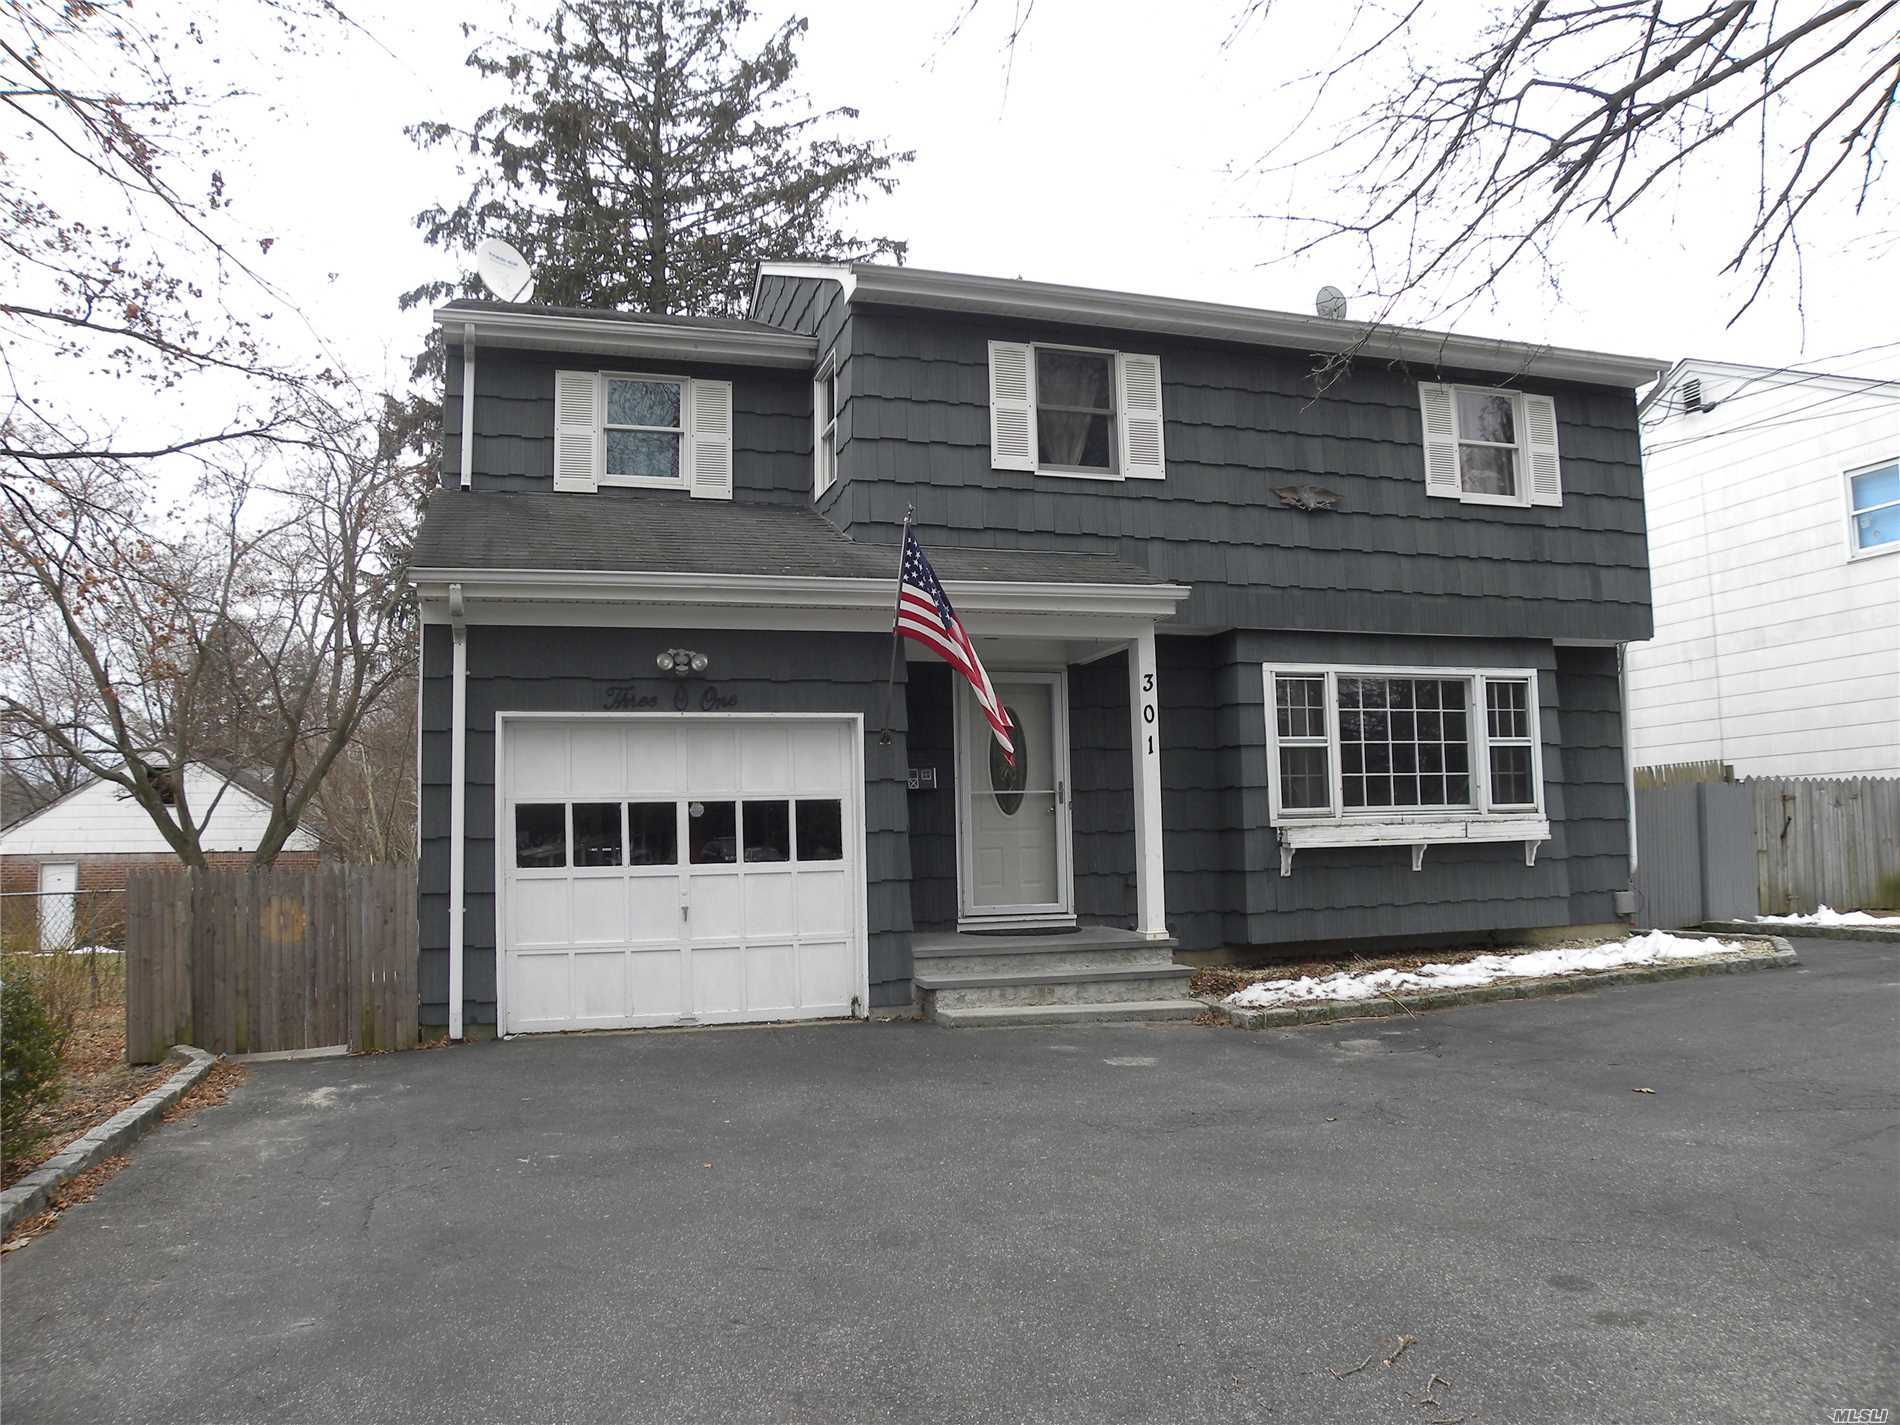 This 5 Bedroom Spacious Colonial Is Perfect For A Large Family With Two Master Suites -- Room For Mom / Extended Family. Updated Granite Stainless Kitchen, Hardwood Oak Floors, Private Quiet Yard, 3 Zone Heating. Priced To Sell.